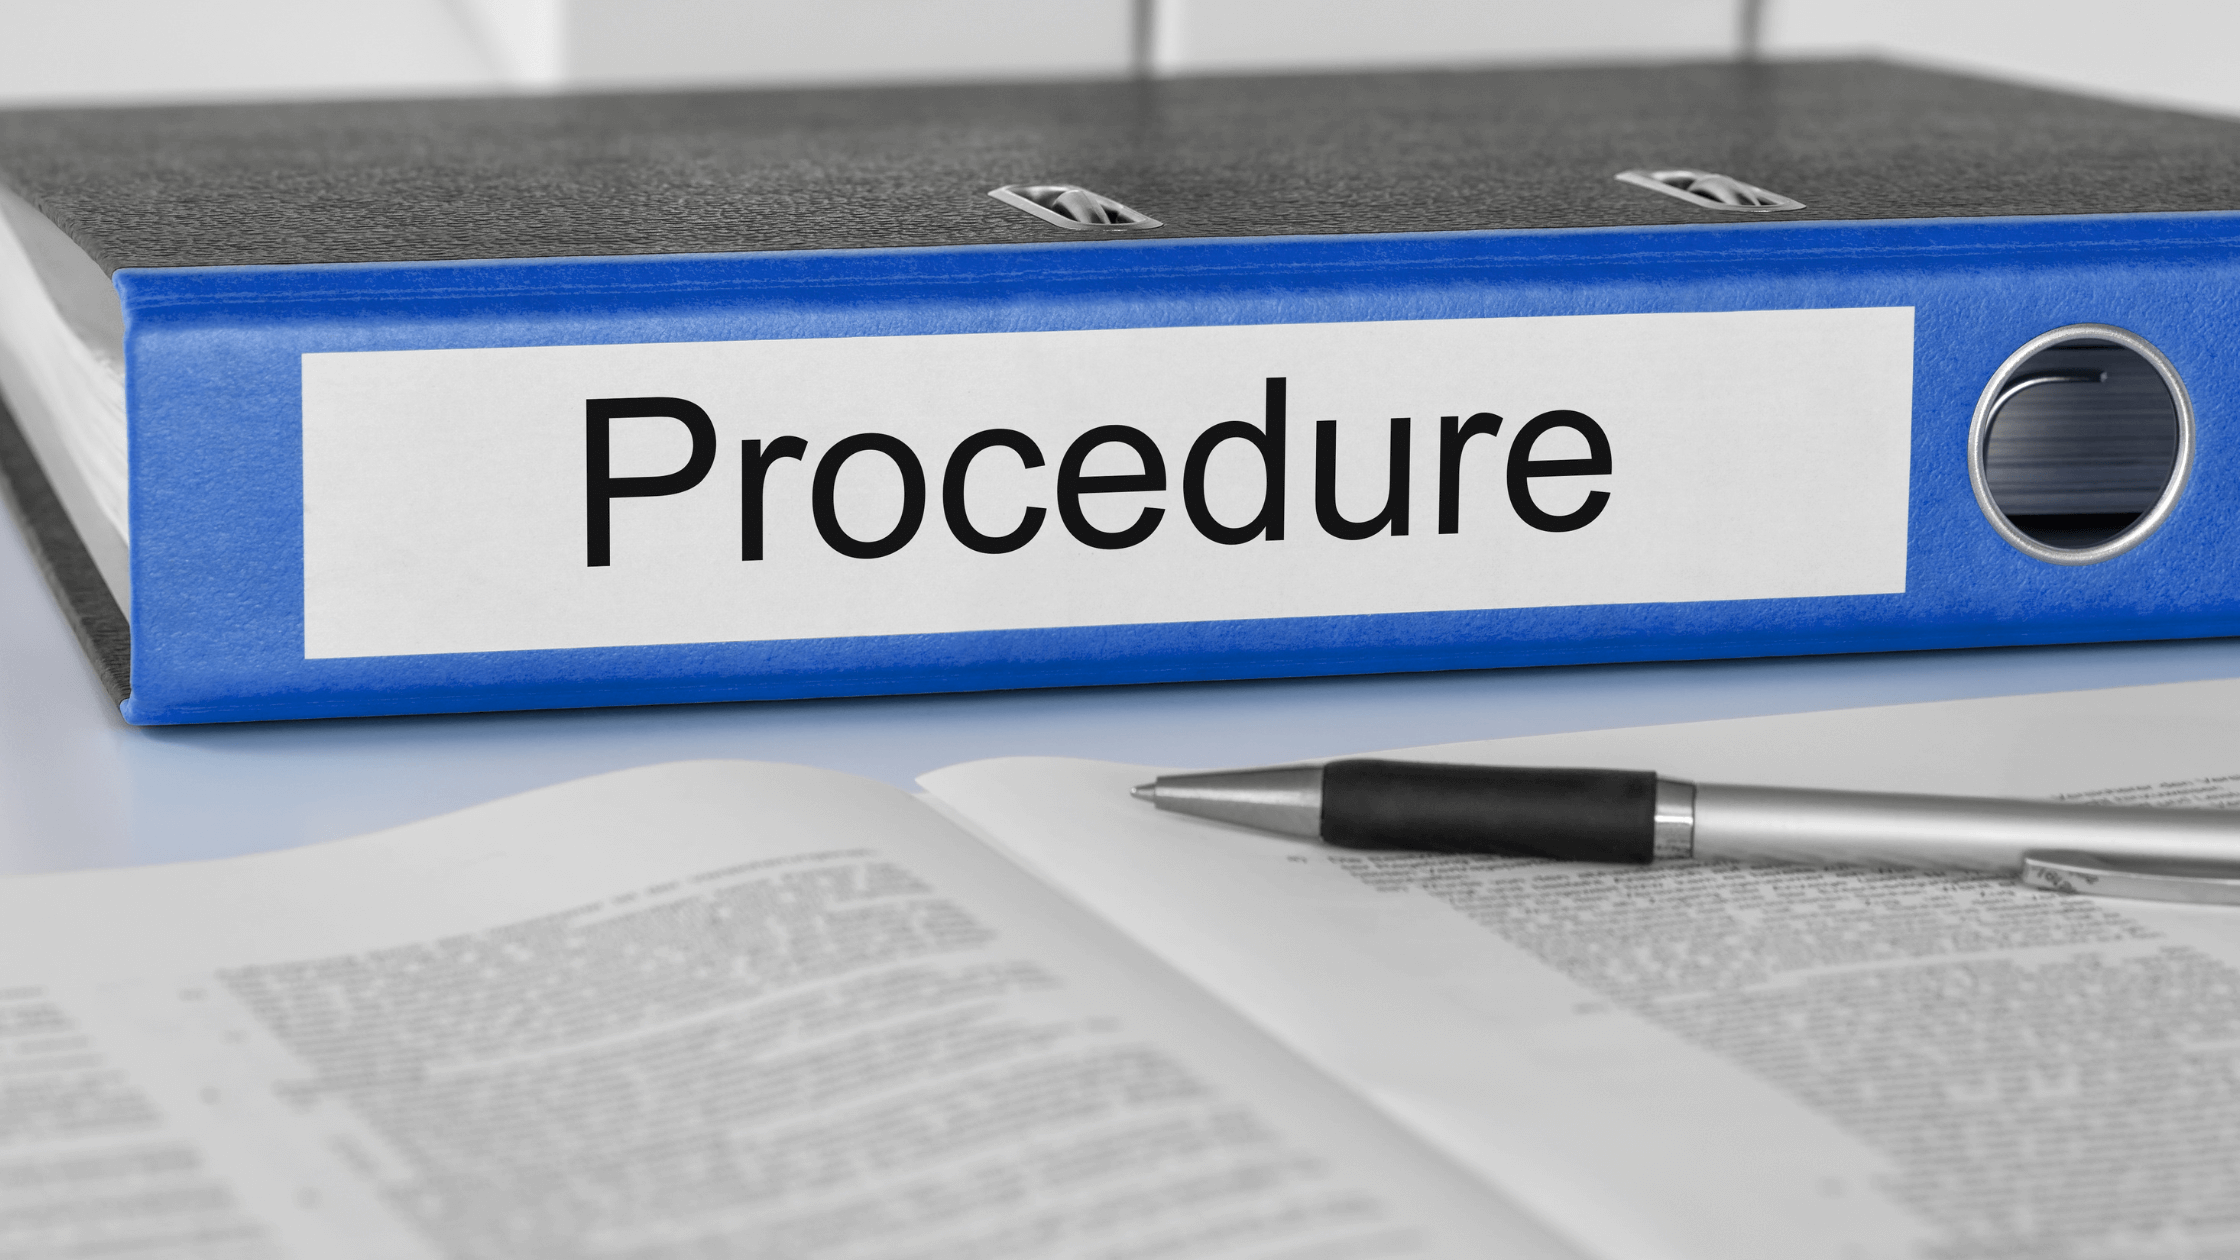 Why are Standard Operating Procedures (SOPs) important? 